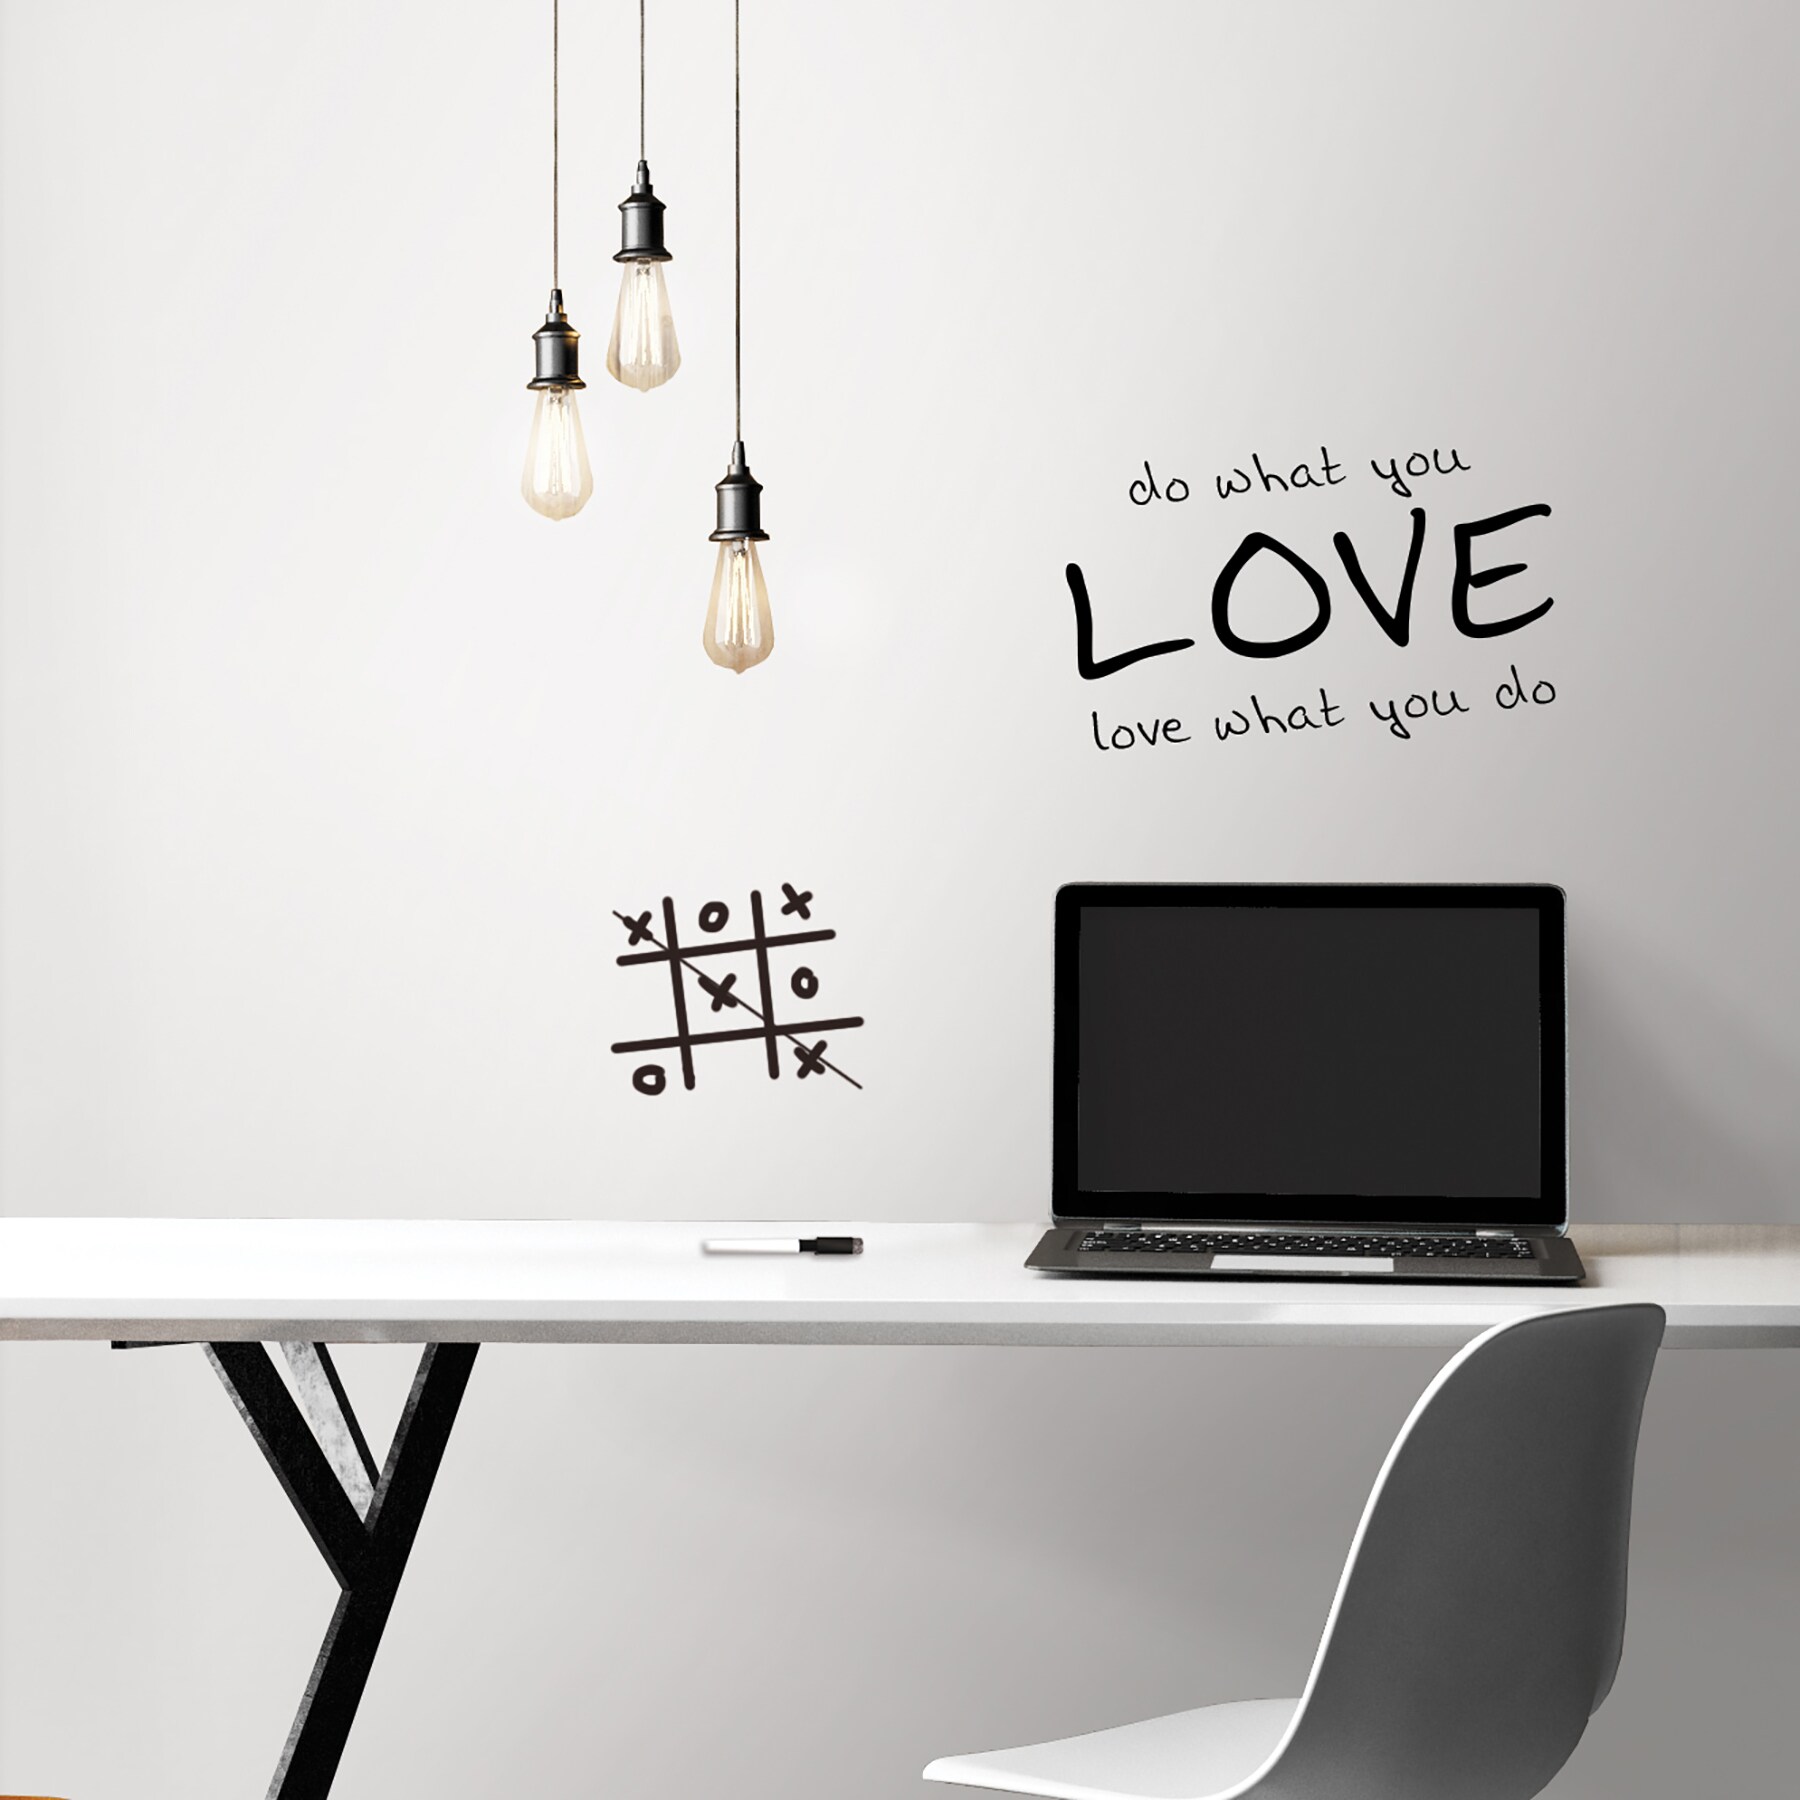 Wallcoverings Dry Erase Intuitive Design wallpapers prints